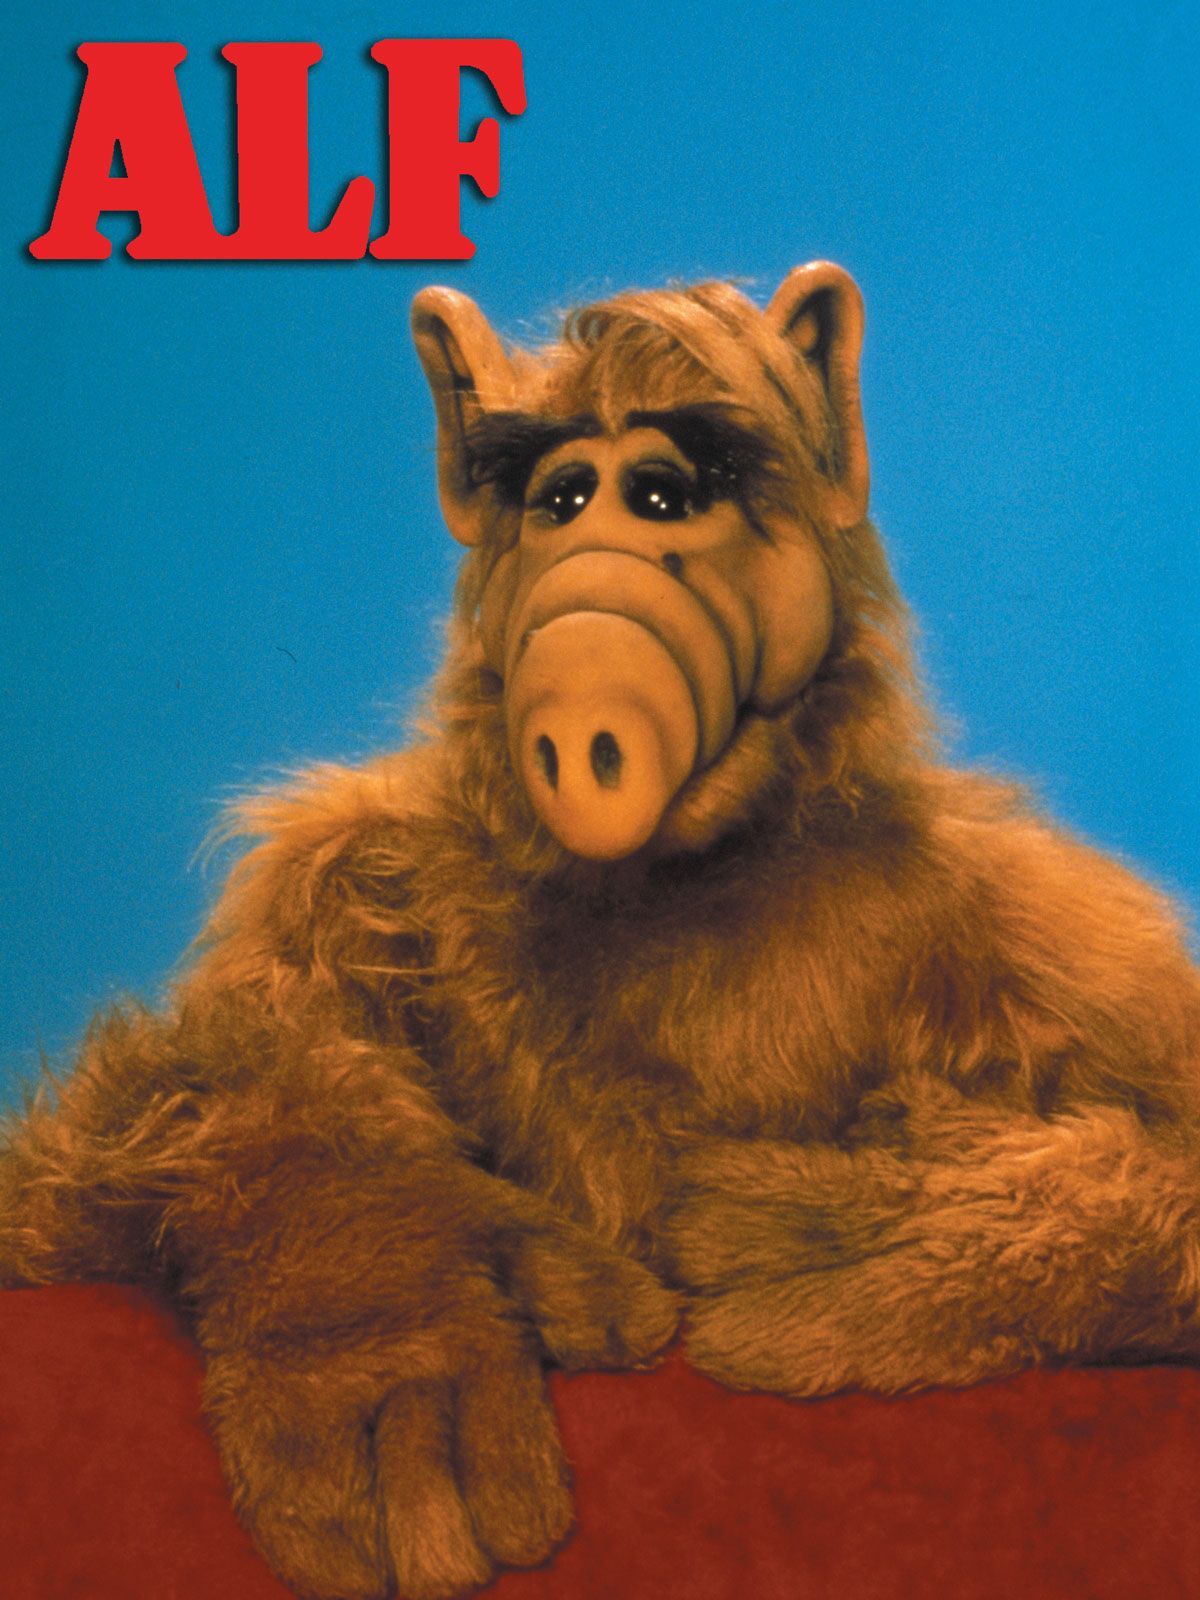 Alf Image Character Live Action HD Wallpaper And Background